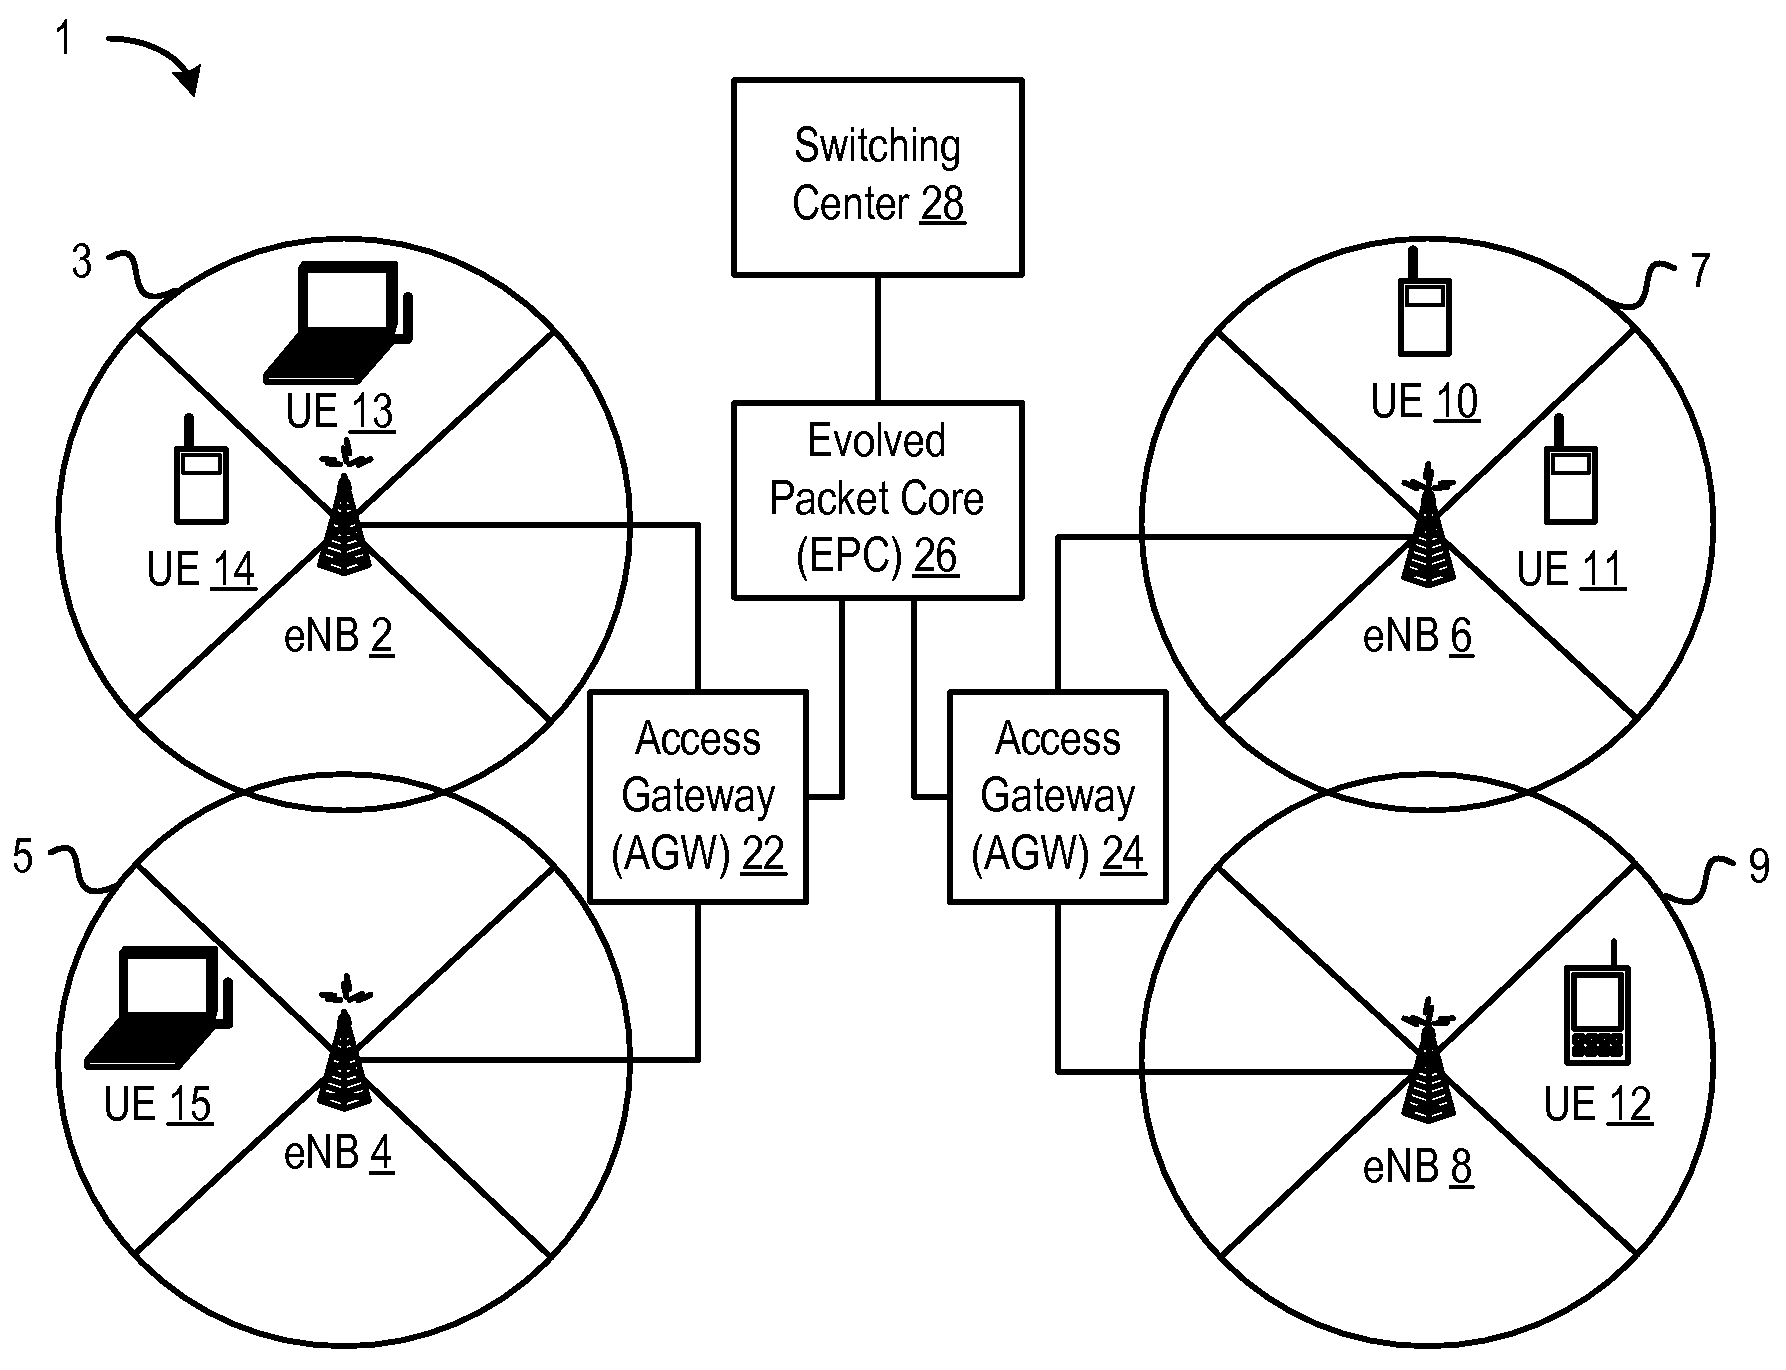 Method for Efficient Control Signaling of Two Codeword to One Codeword Transmission